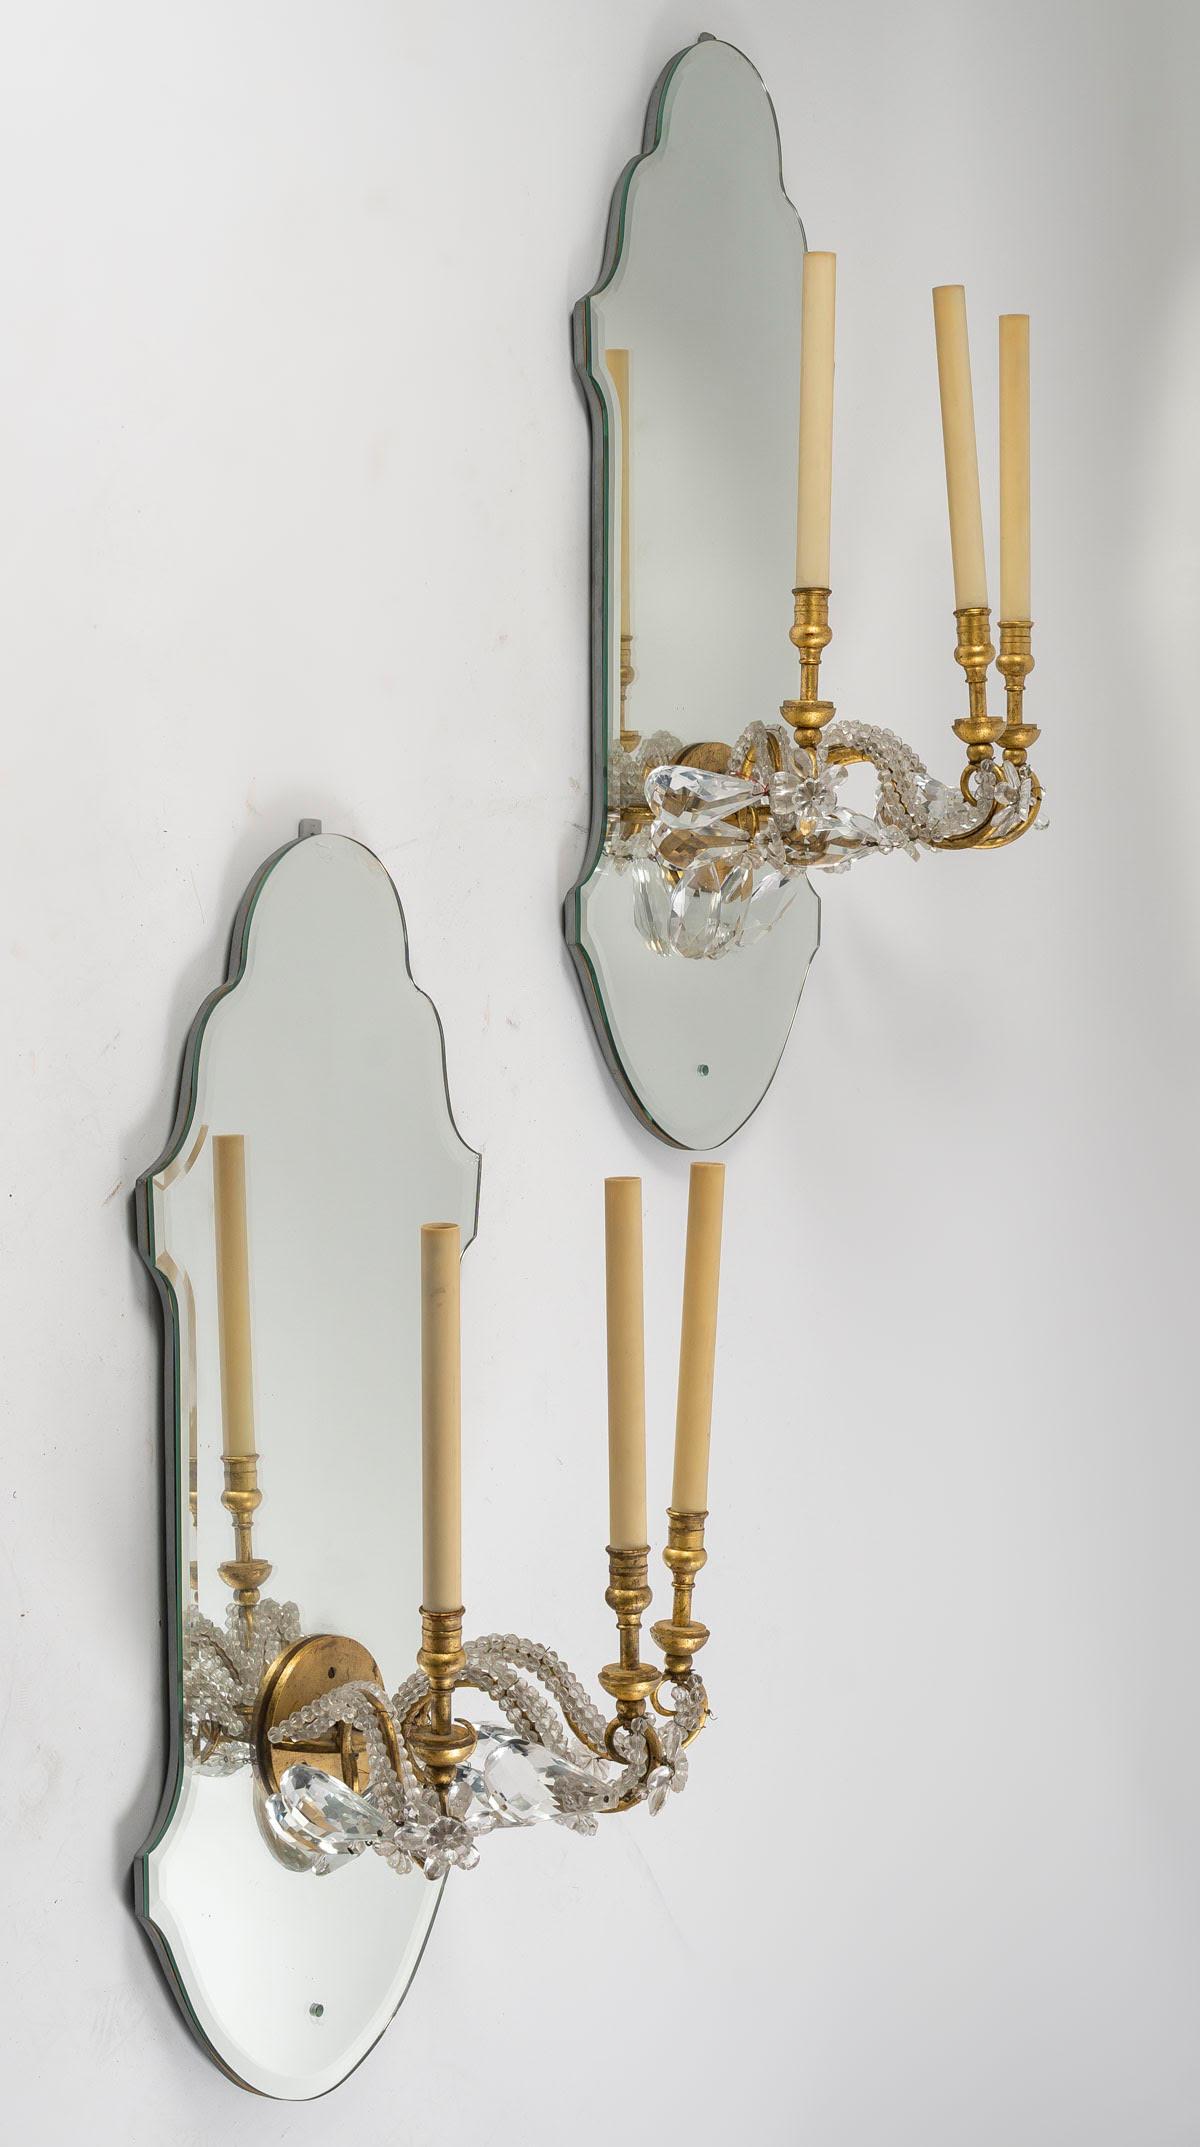 Pair of gilded iron and mirror sconces with glass drops, 1950-1960.

Large pair of sconces by Maison Delisle, 1950-1960, in mirror and gilded iron with glass pendants.
h: 85cm, w: 33cm, d: 30cm